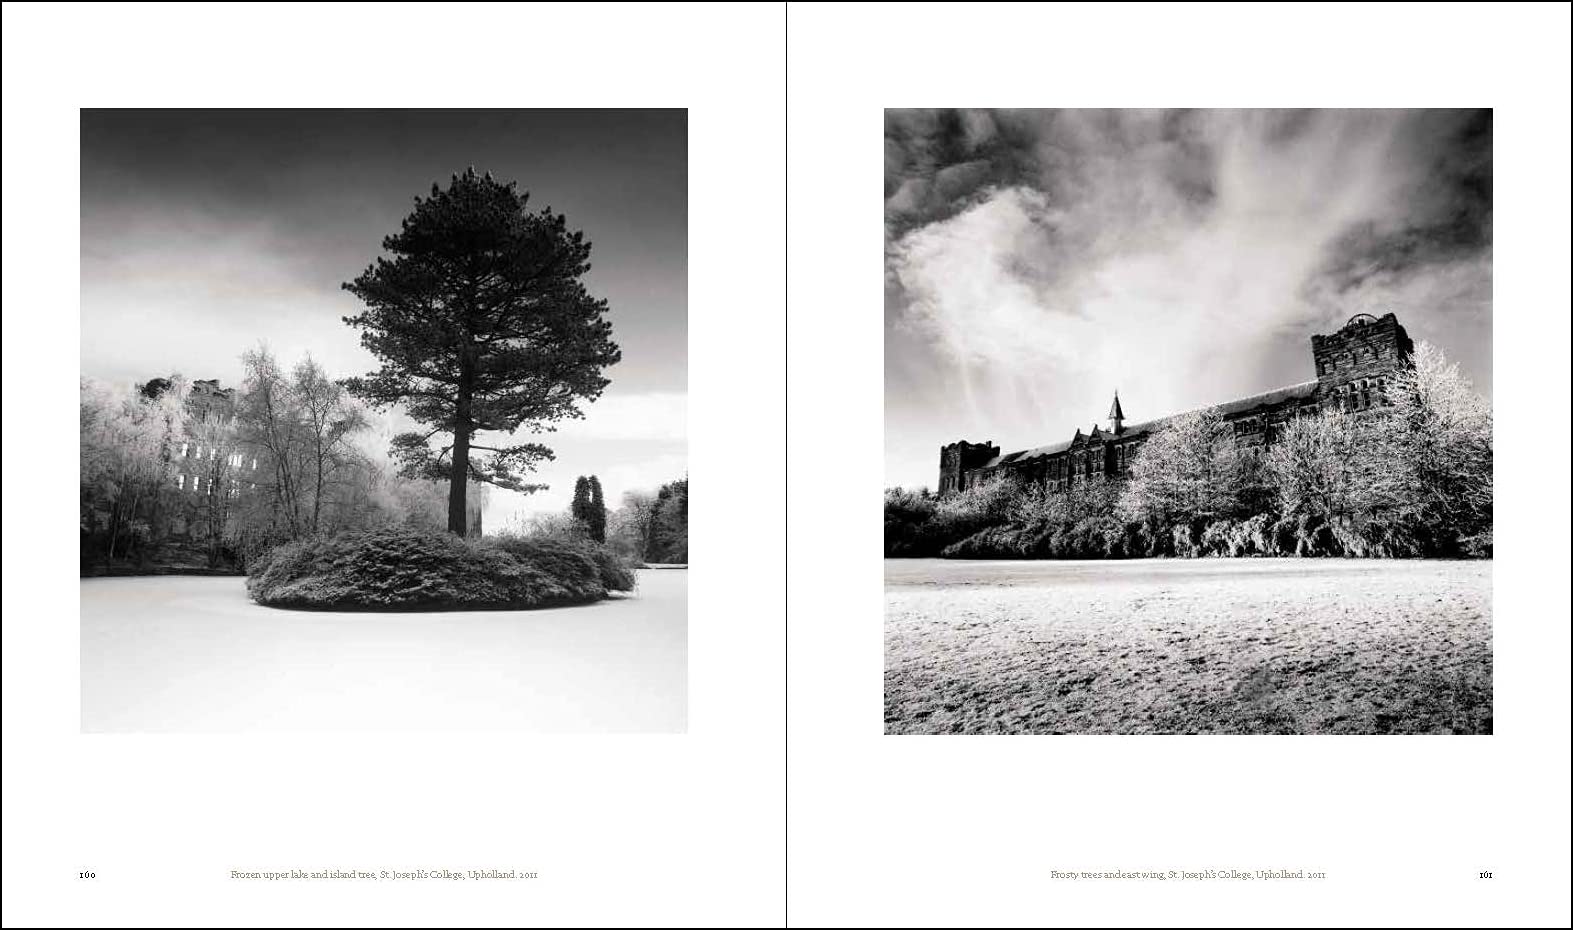 A spread from Michael Kenna's "St. Joseph's College, Upholland."